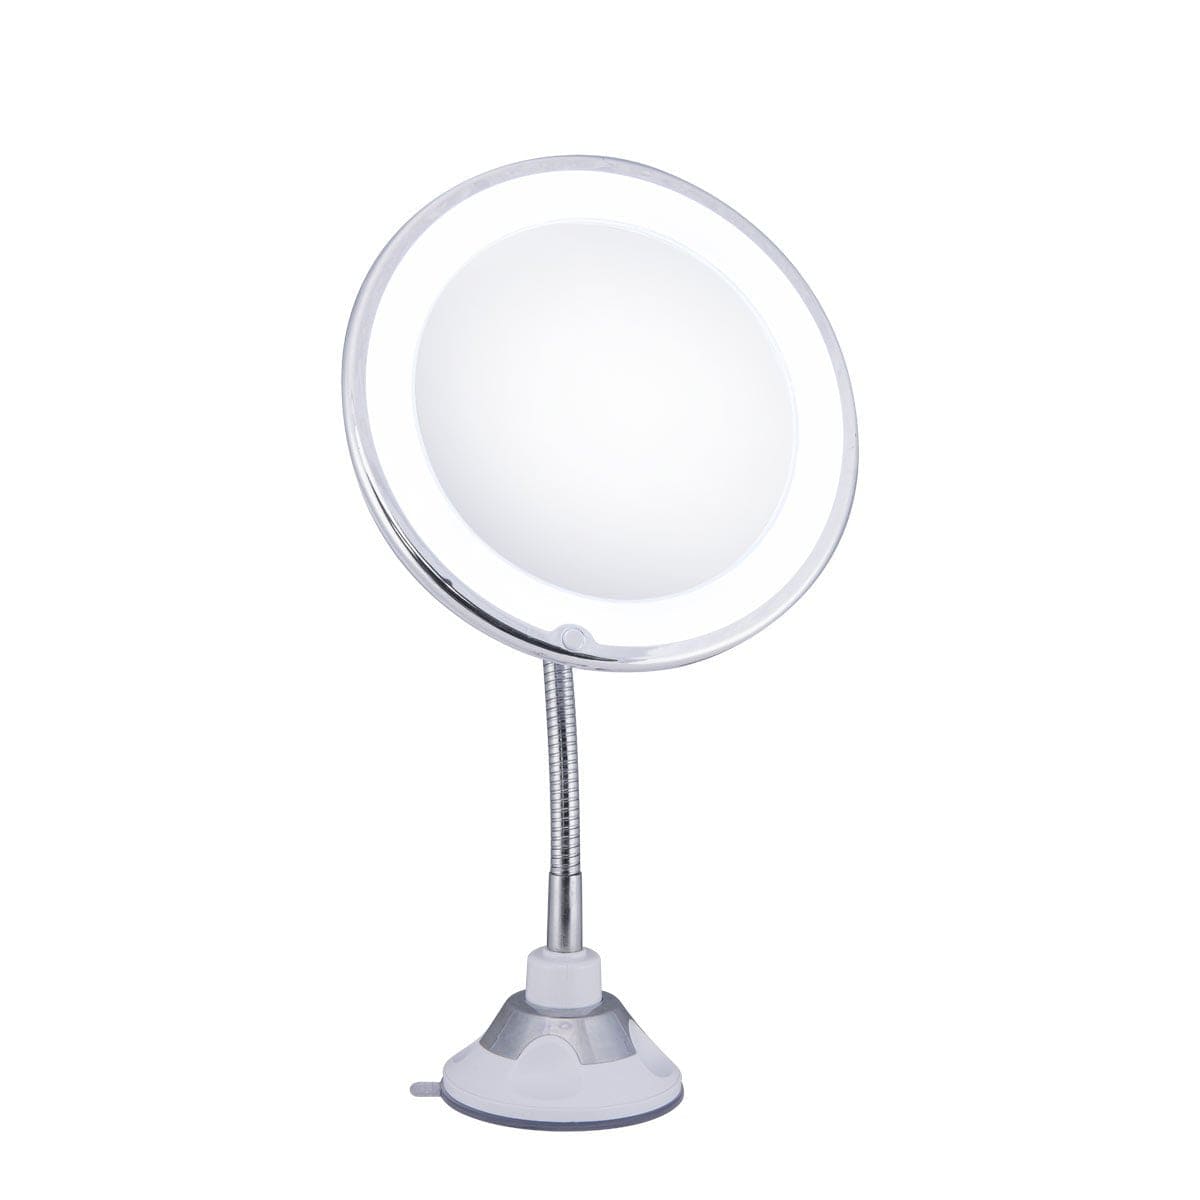 10x Magnifying Makeup Mirror with LED light